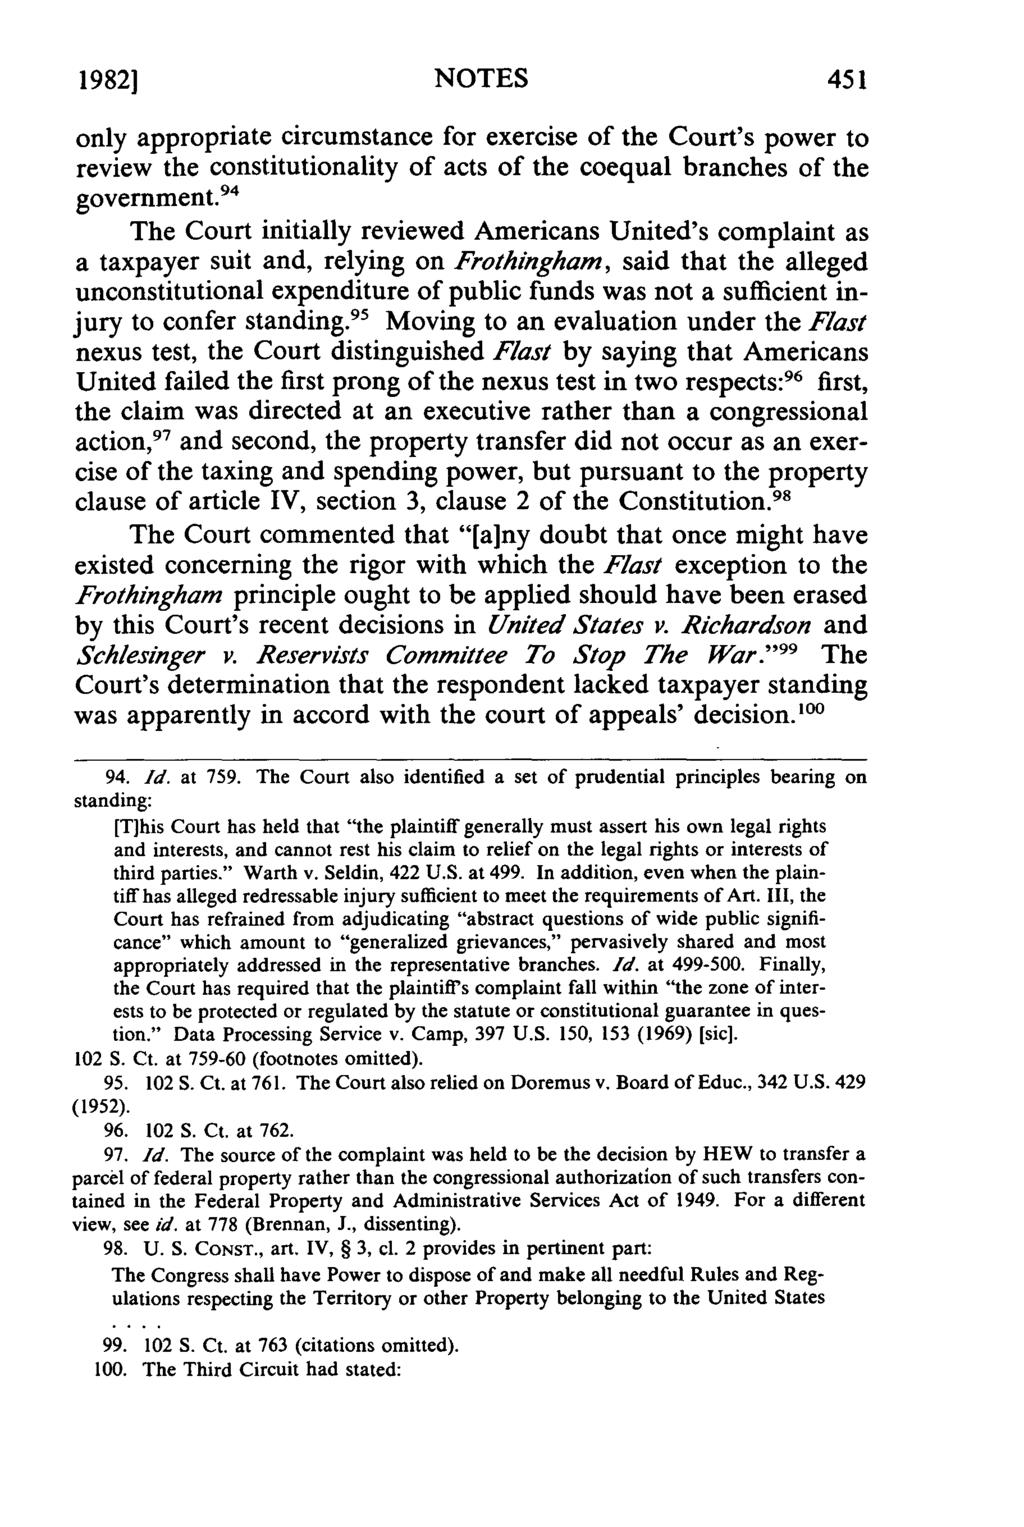 19821 NOTES only appropriate circumstance for exercise of the Court's power to review the constitutionality of acts of the coequal branches of the government.